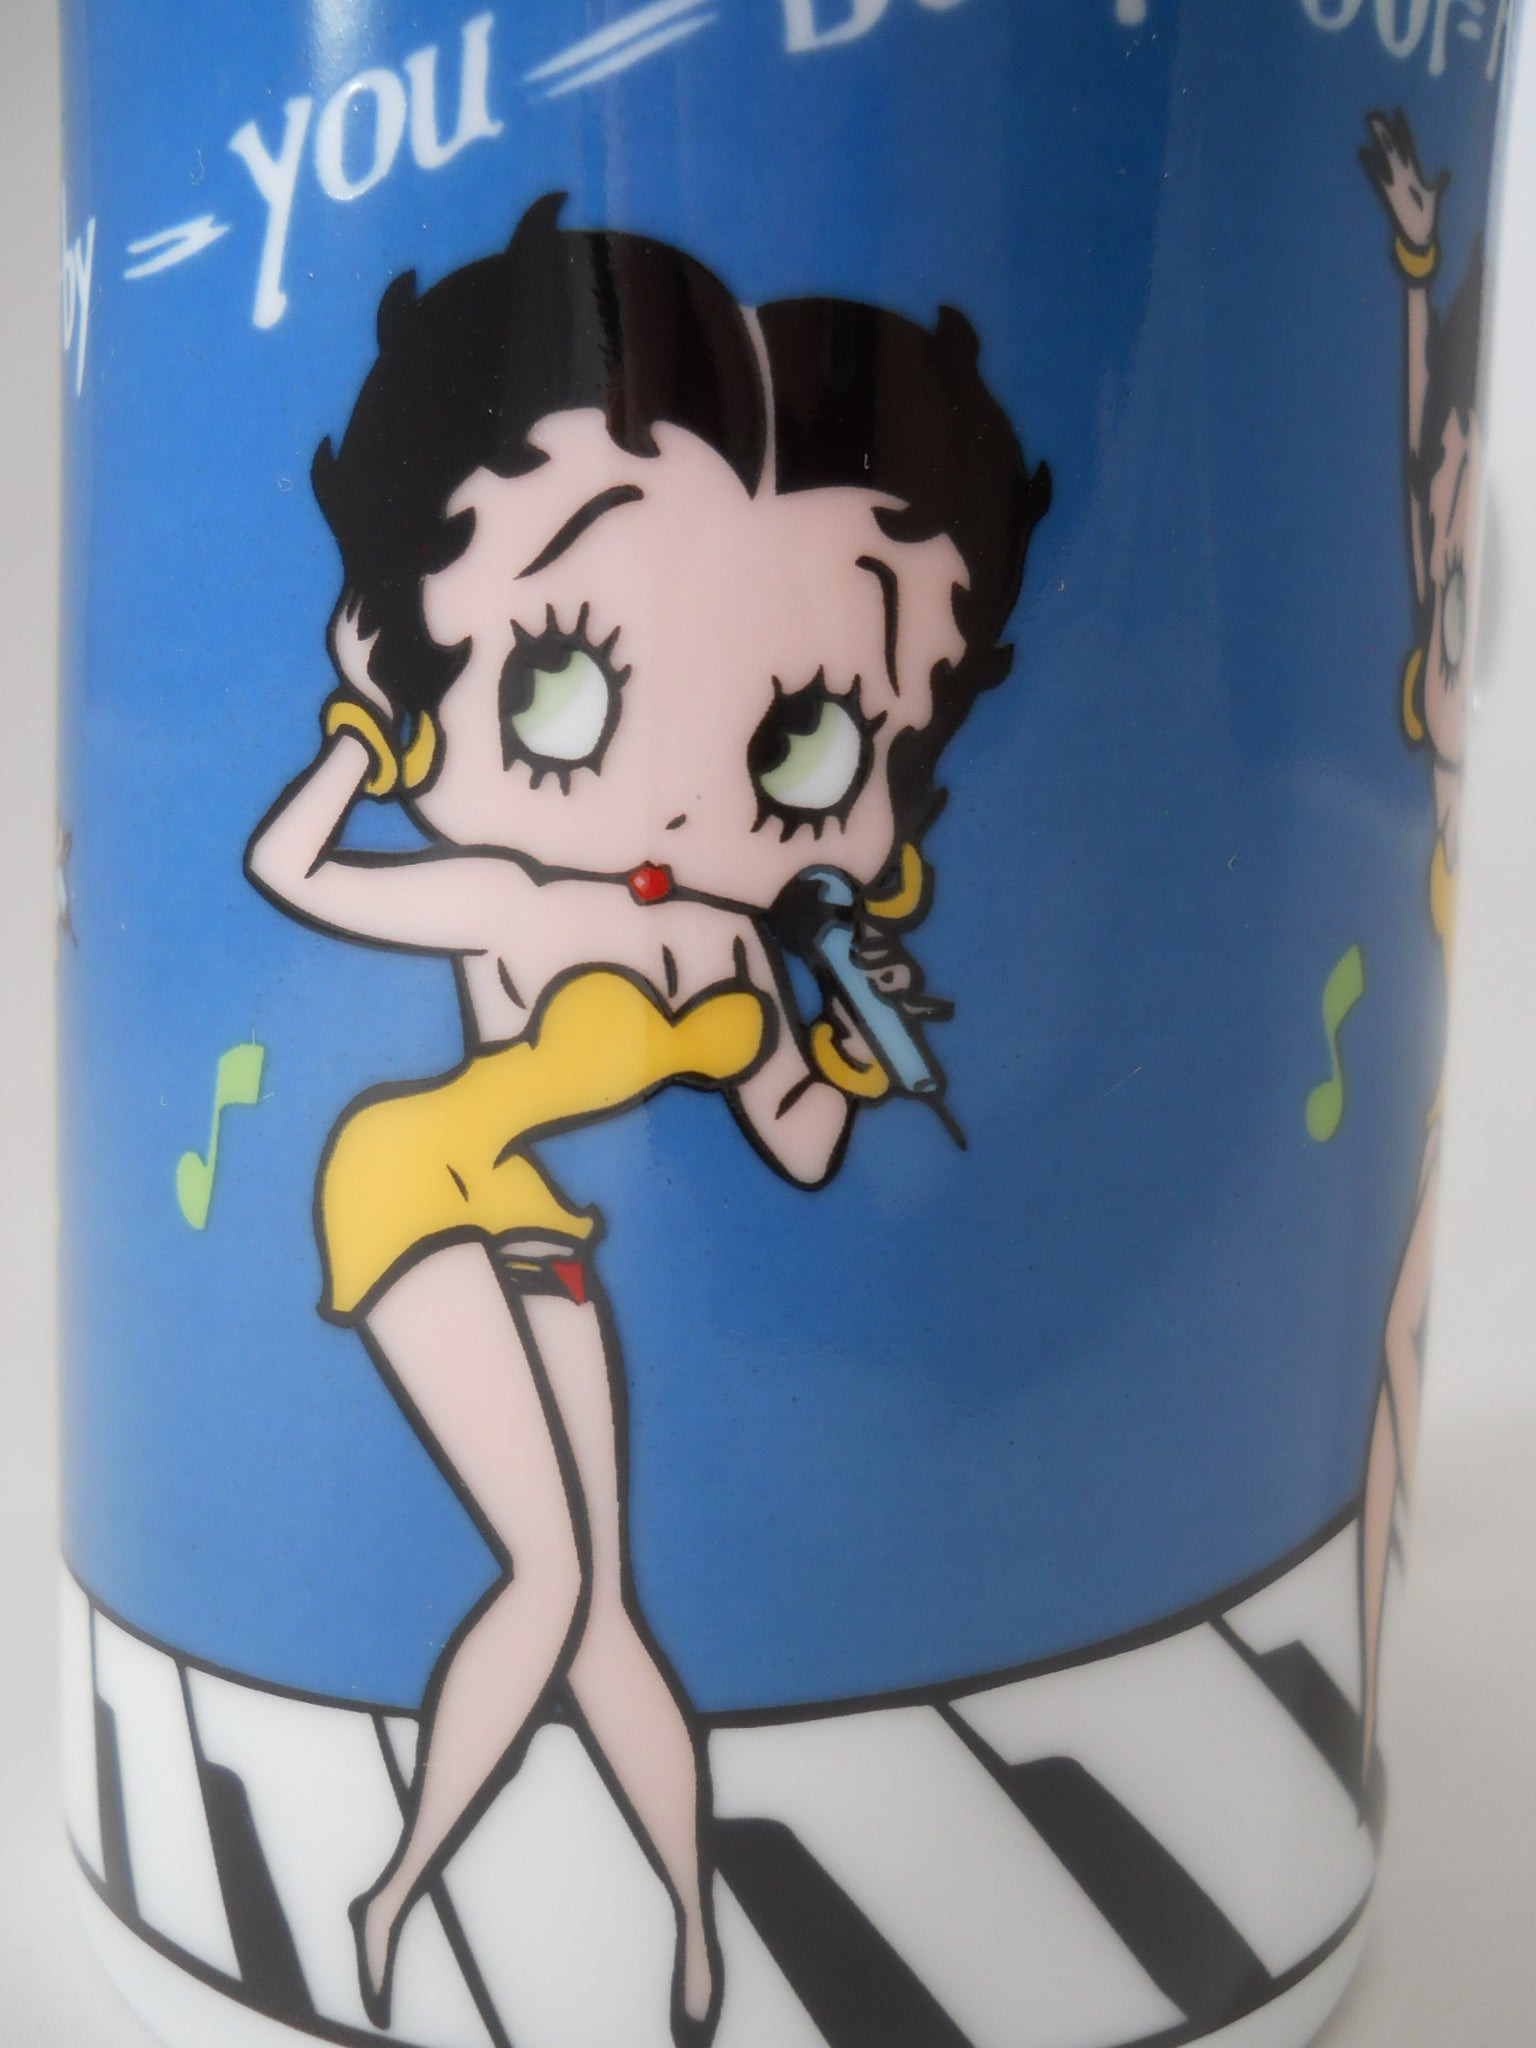 Betty Boop - Avenue of the Stars - Ceramic Mug Don't forget to pamper me